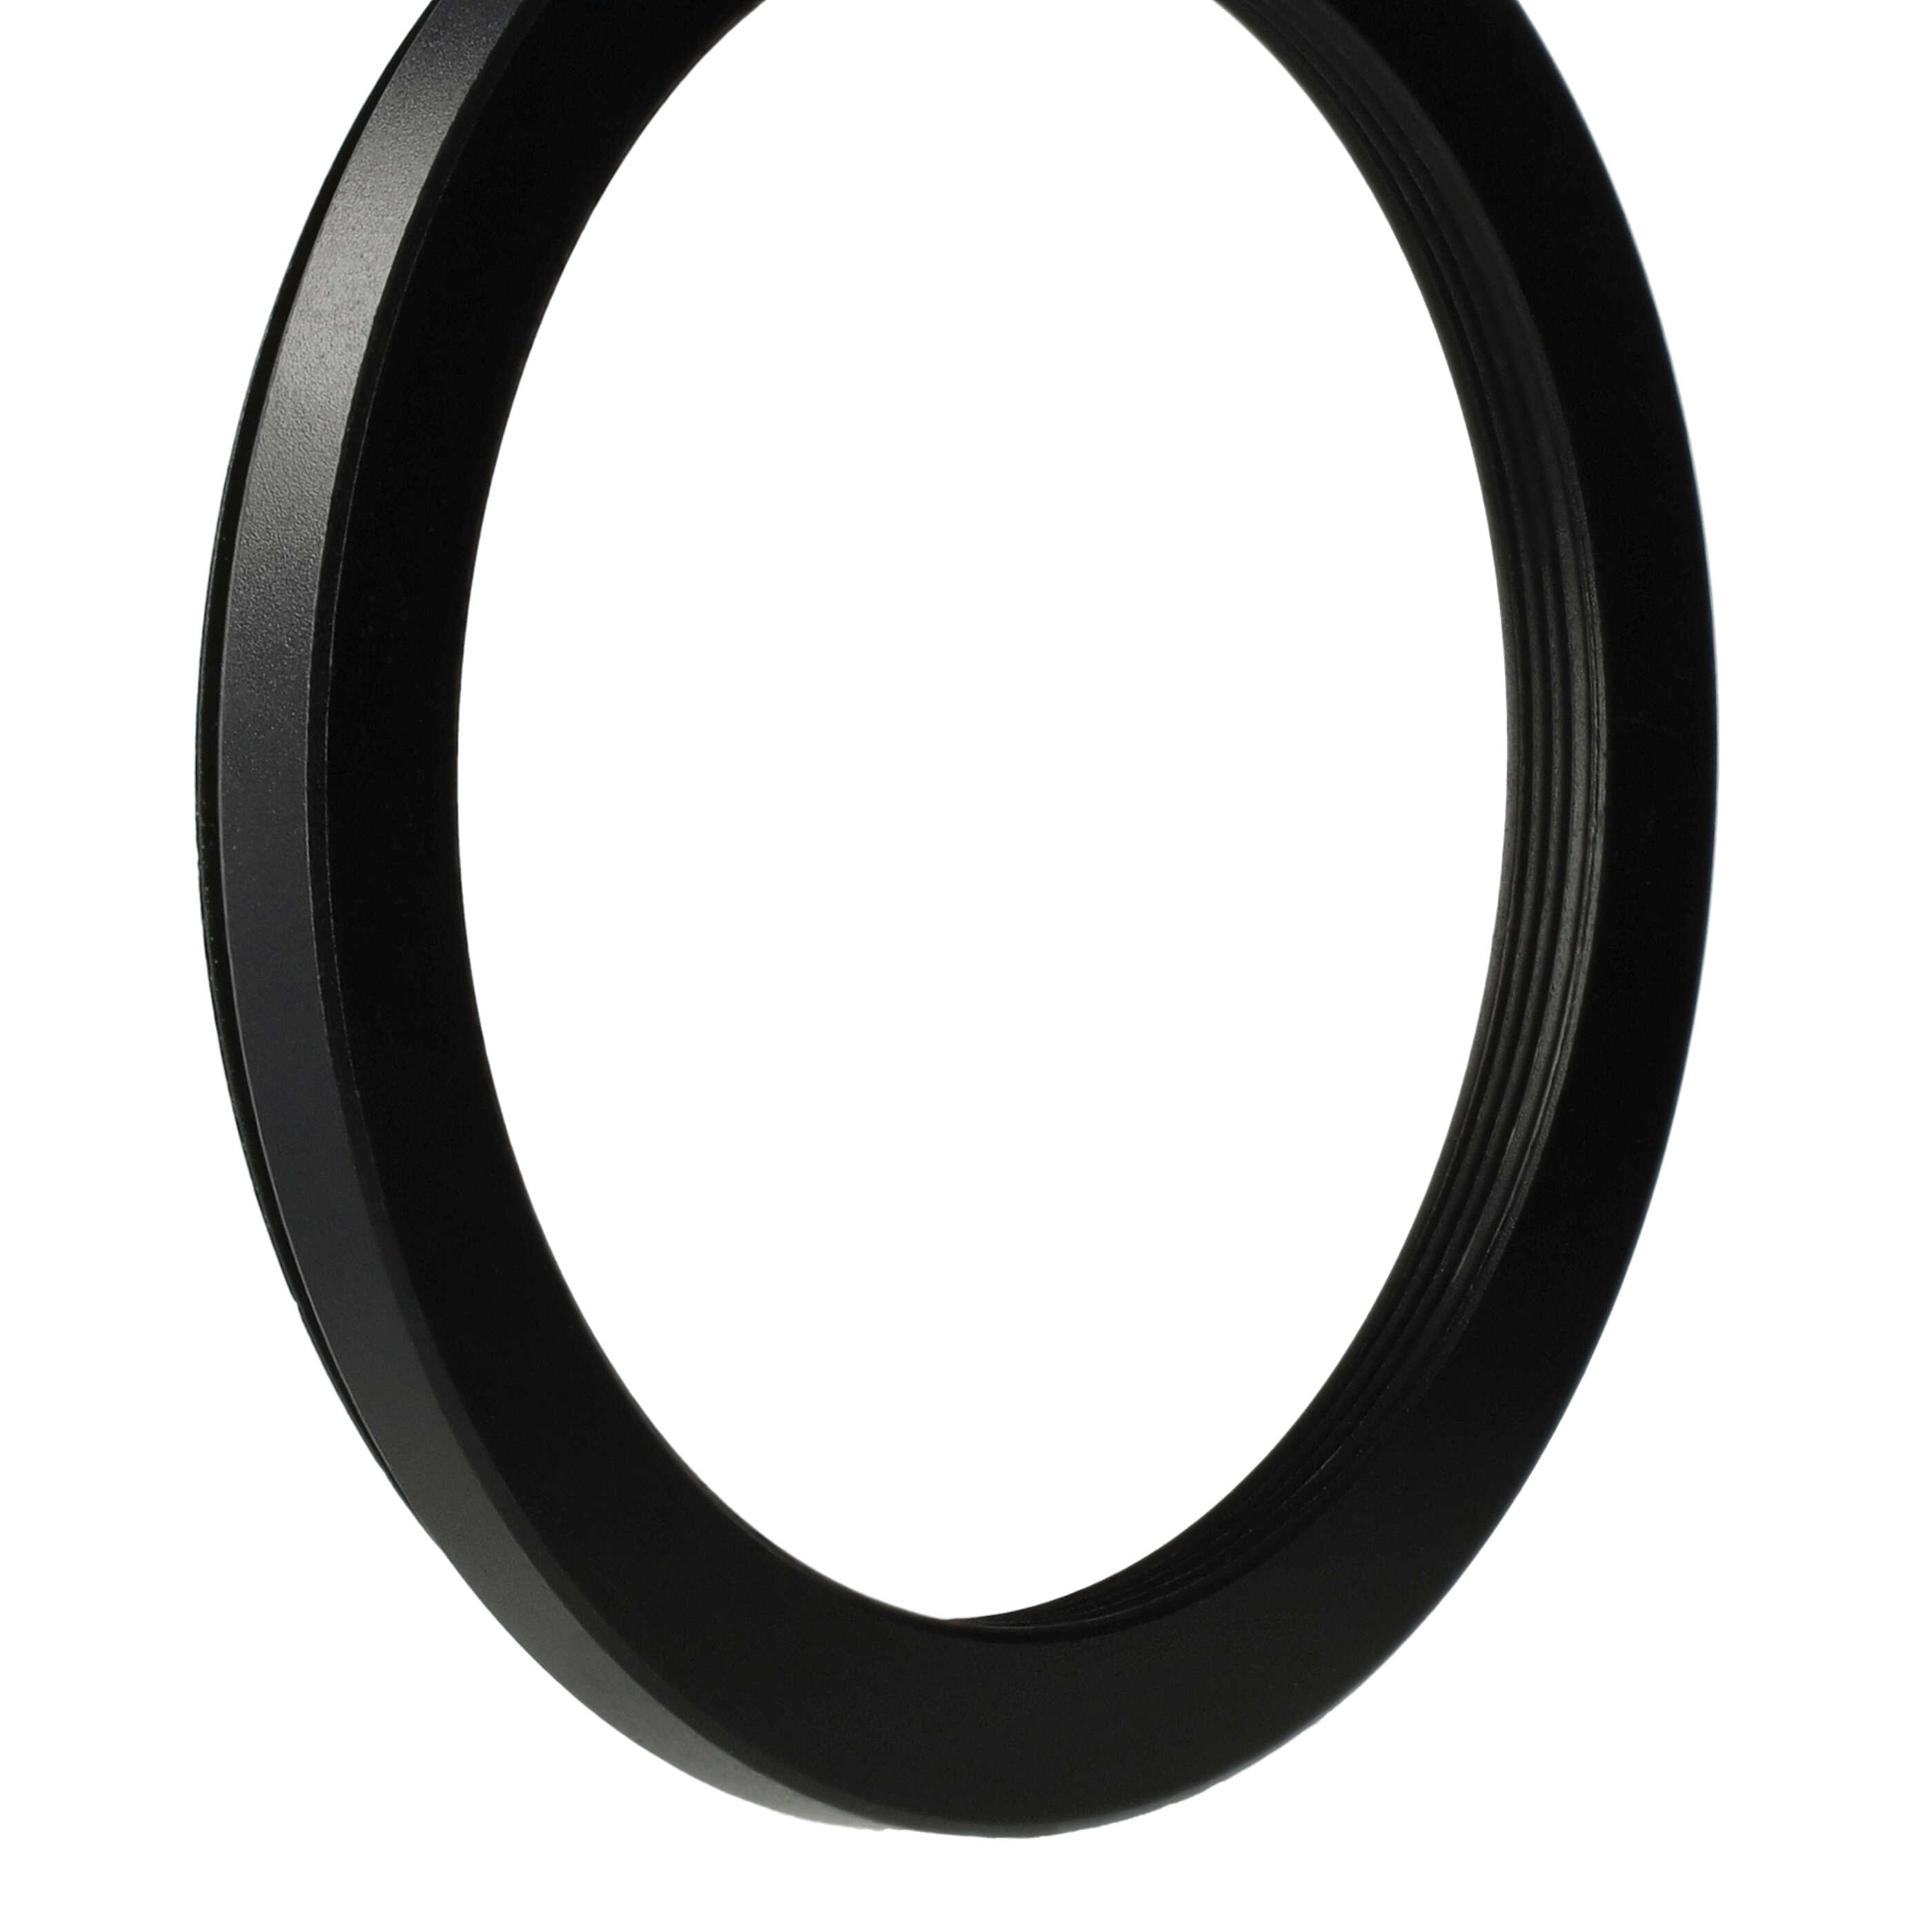 Step-Down Ring Adapter from 58 mm to 49 mm suitable for Camera Lens - Filter Adapter, metal